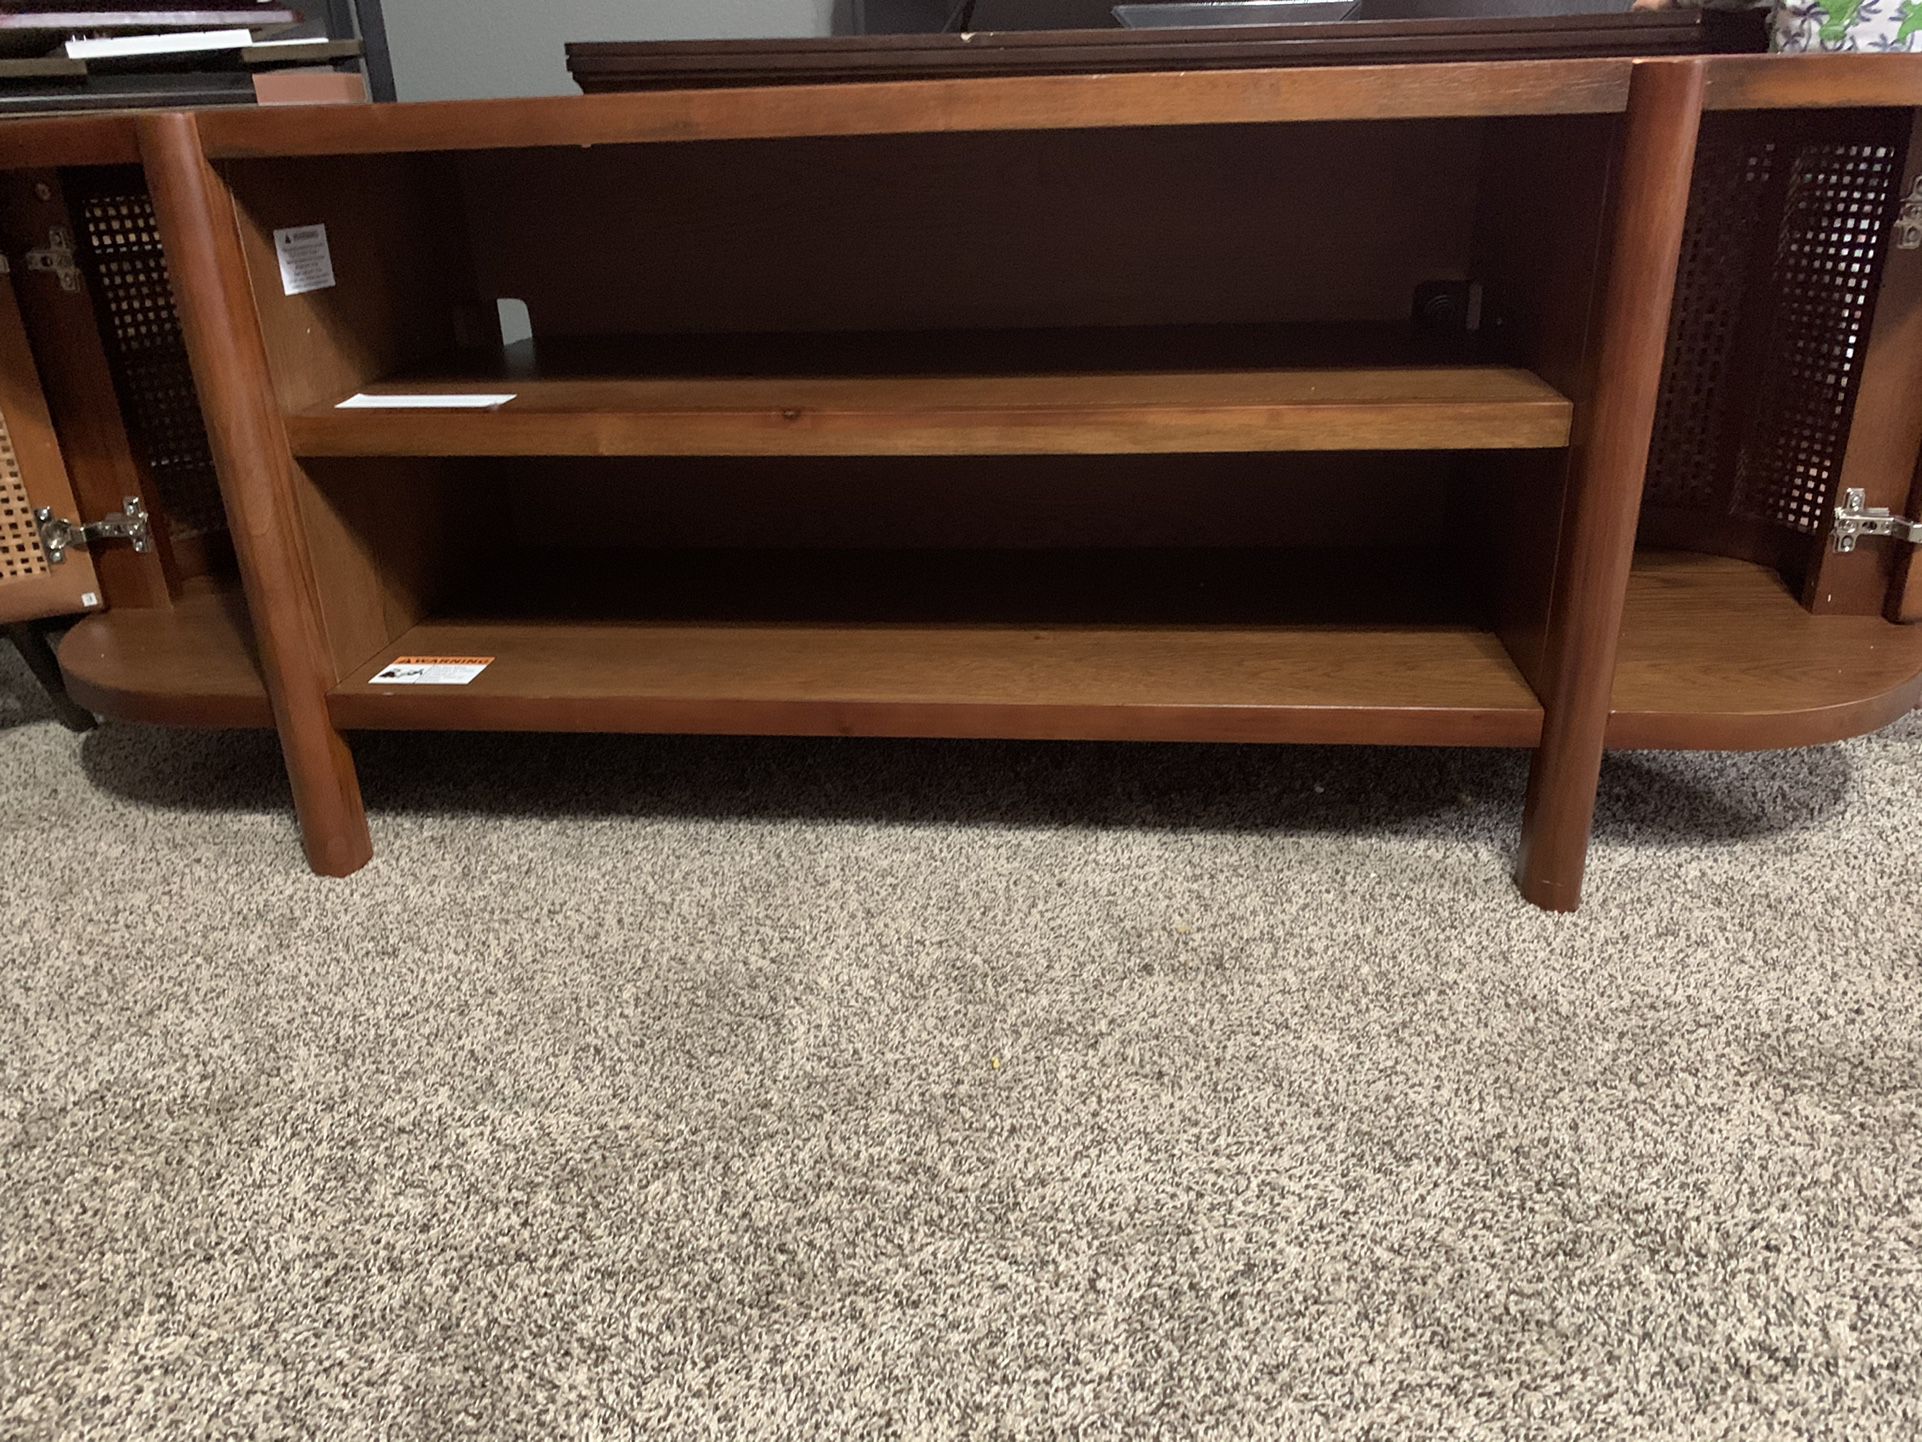 New Wood Tv Stand